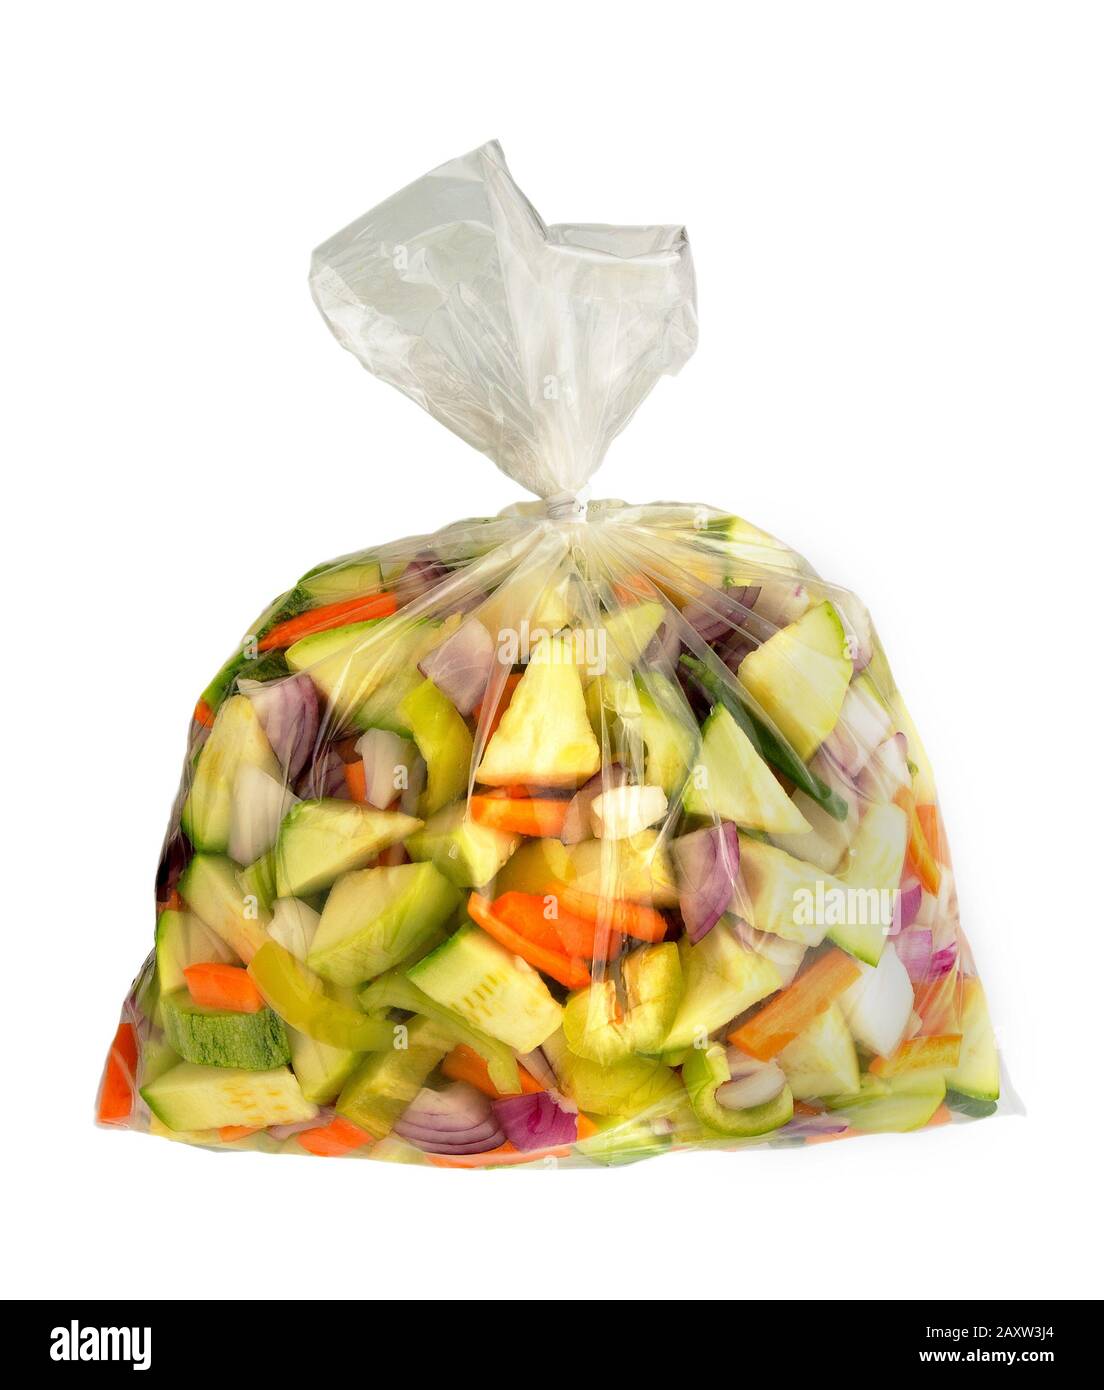 A Grade Fresh Cut Vegetables, Packaging Size Available: 25 to 50Kg